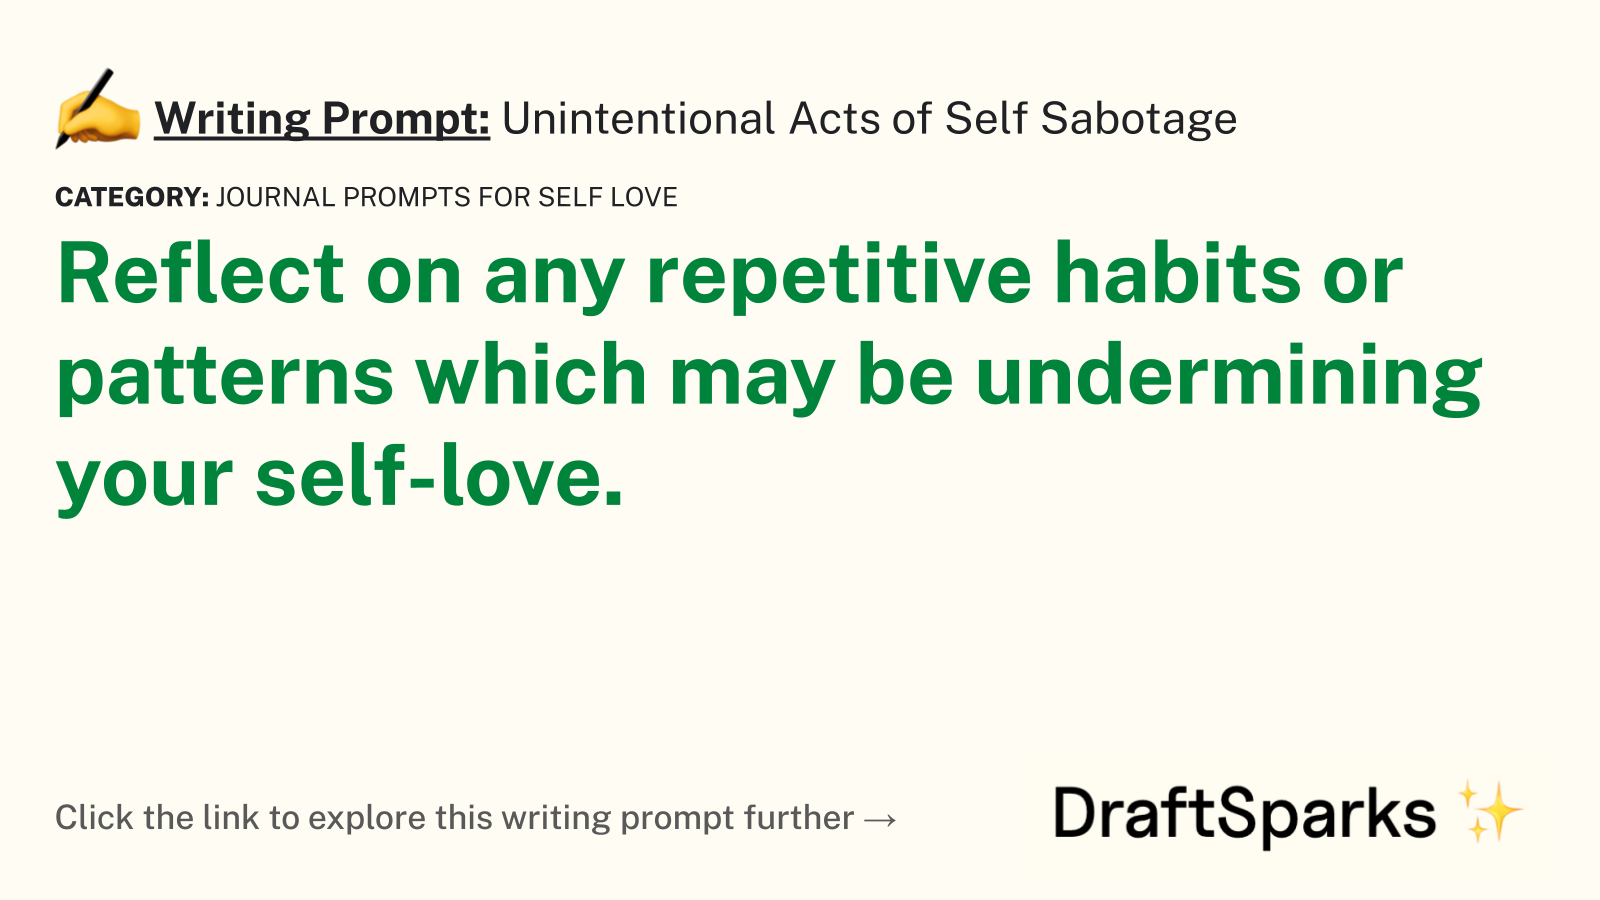 Unintentional Acts of Self Sabotage